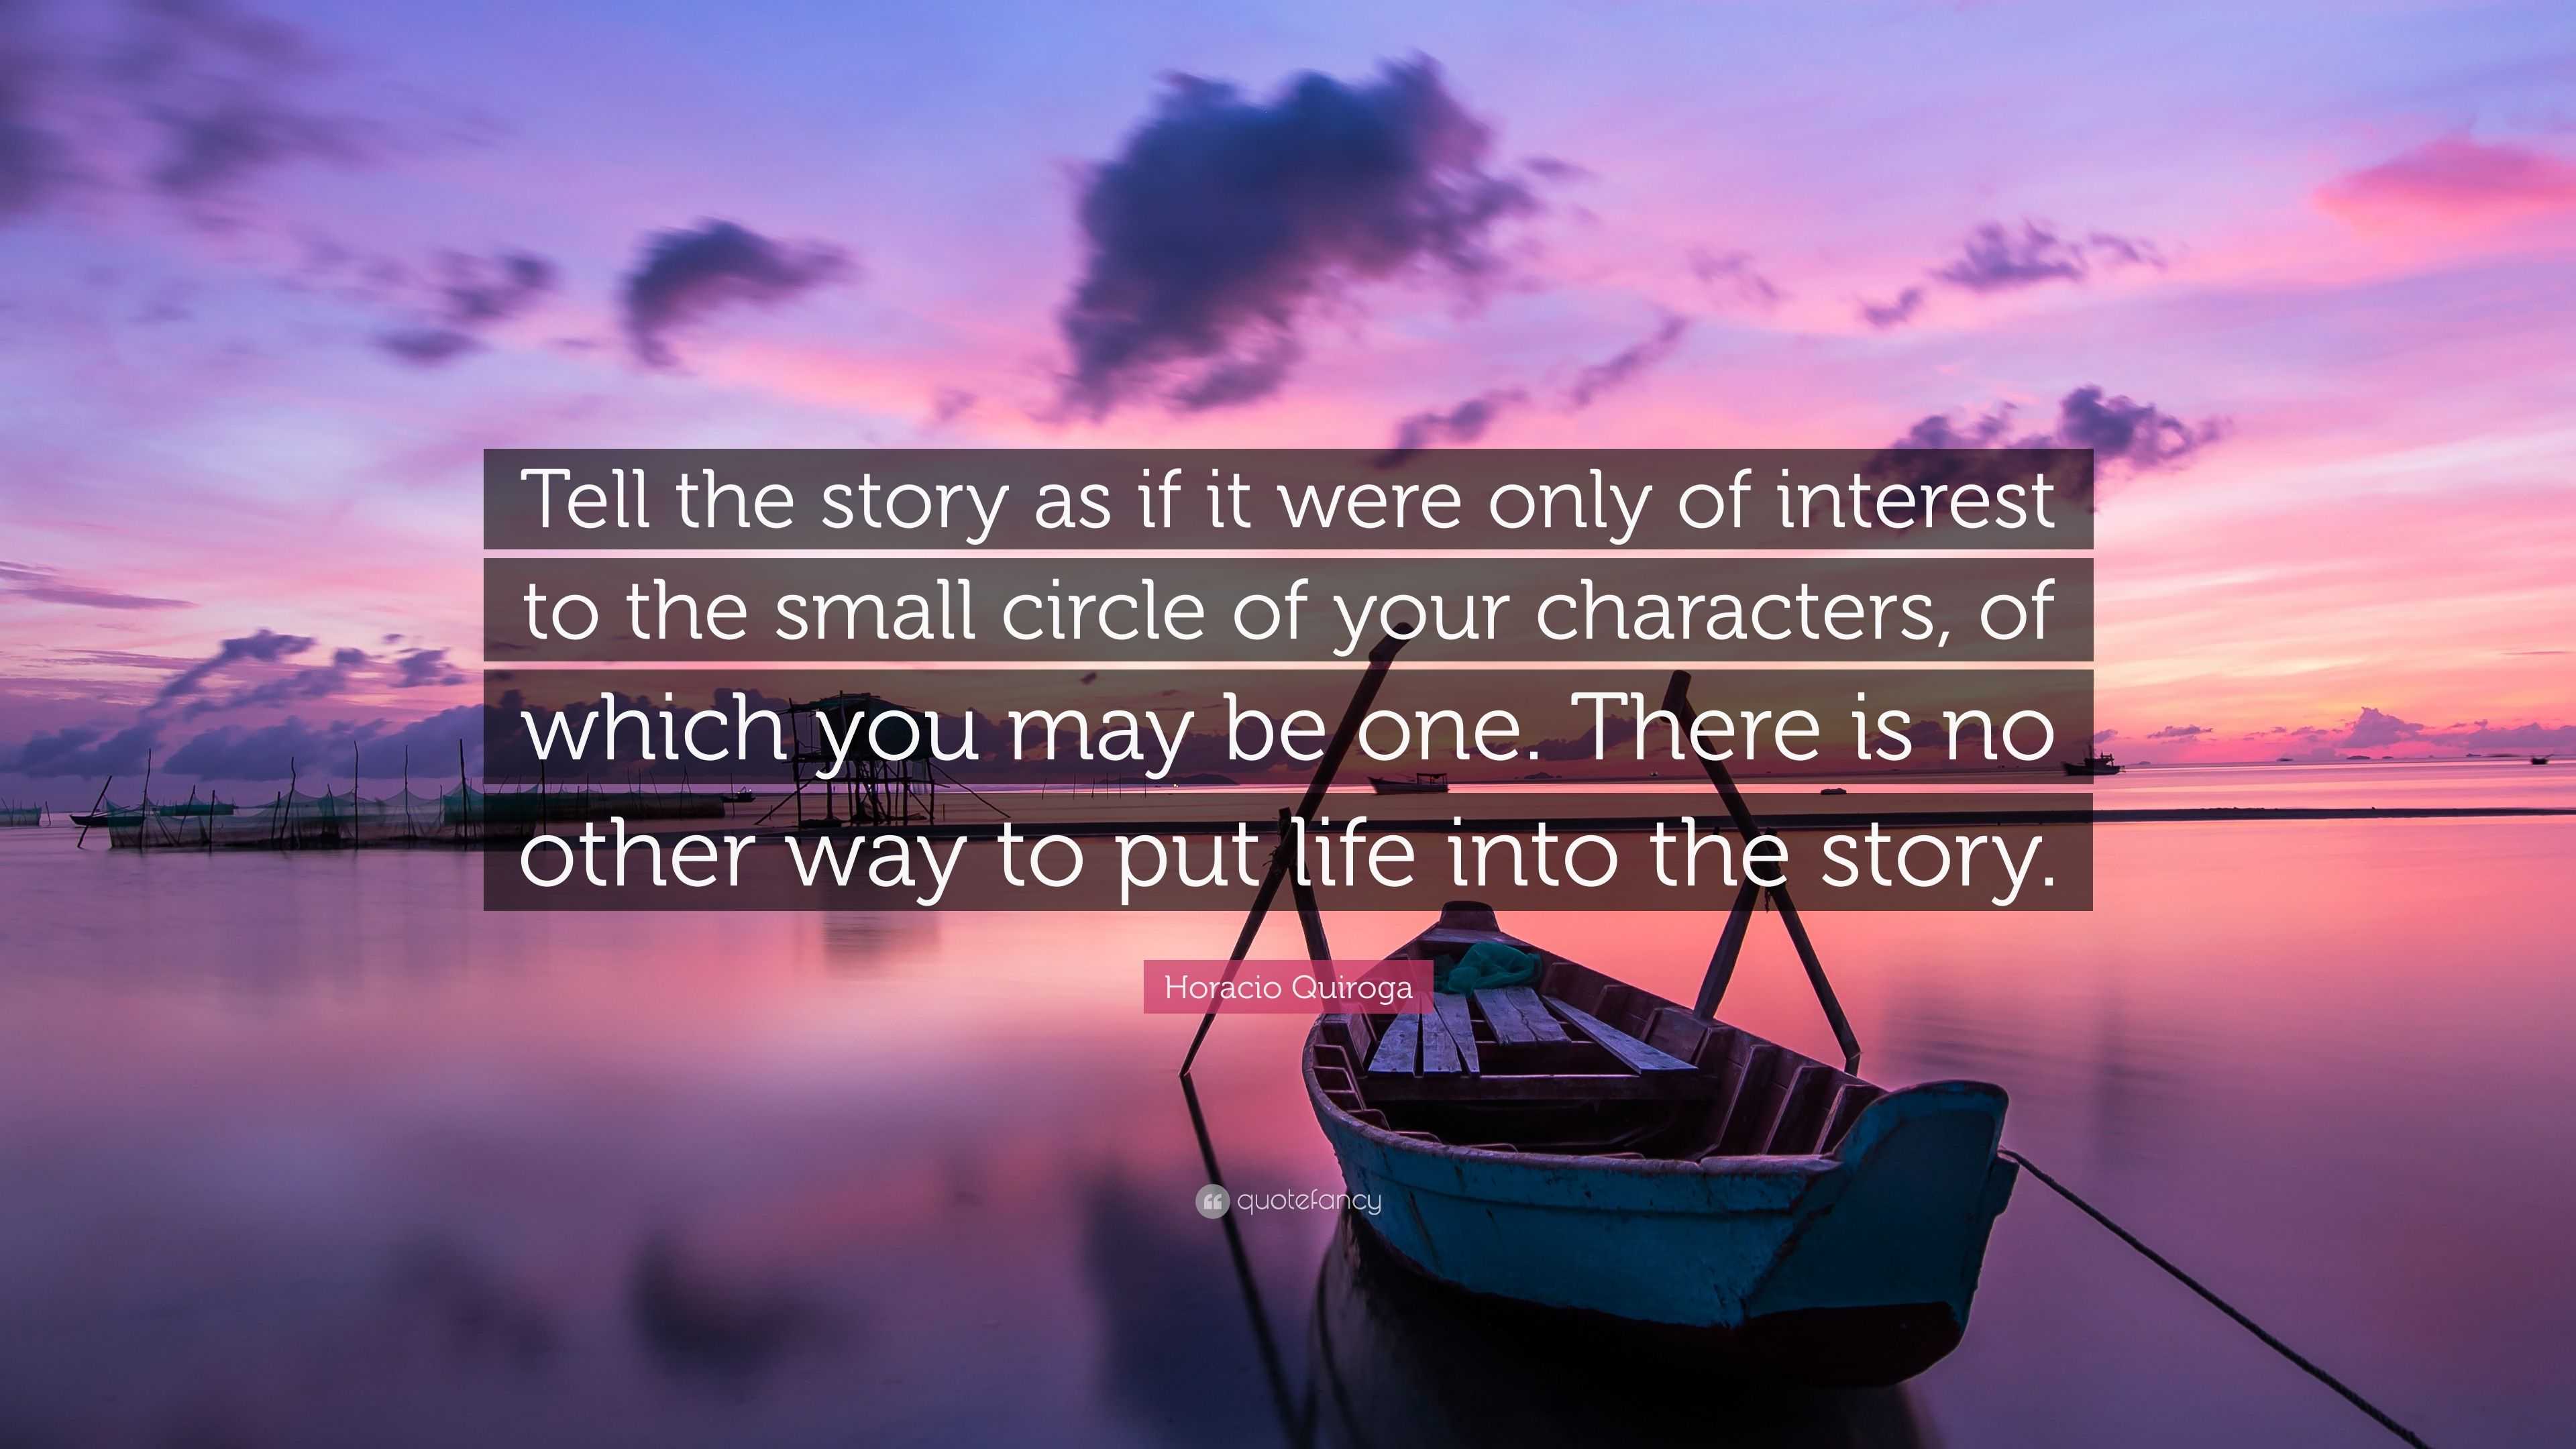 Horacio Quiroga Quote: “Tell the story as if it were only of